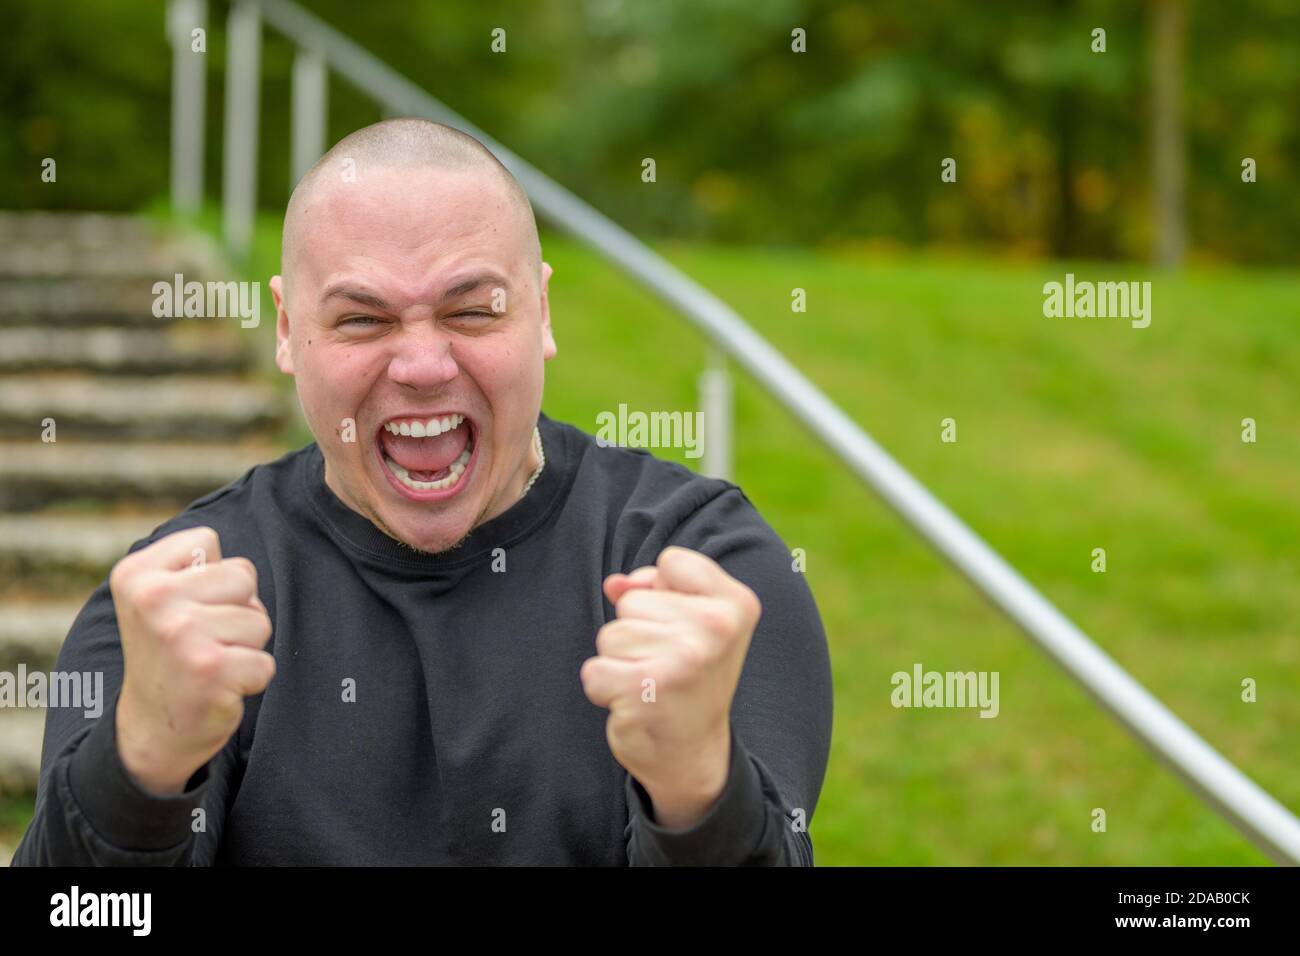 Frustrated angry man yelling at the camera in a rage and clenching his fists in a menacing gesture outdoors in a park Stock Photo